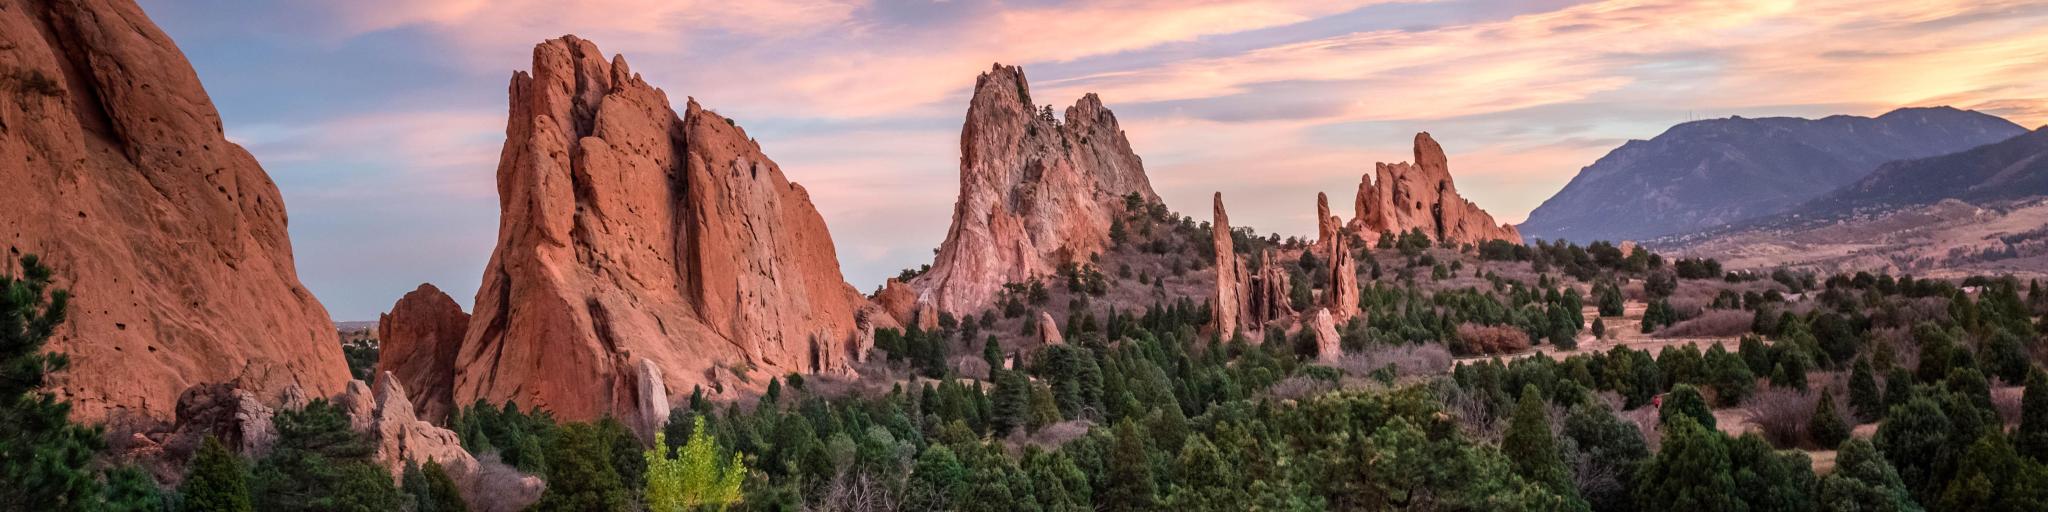 Garden of the Gods, Colorado Springs at sunset with green trees in the foreground and the jagged rock formations in the background.